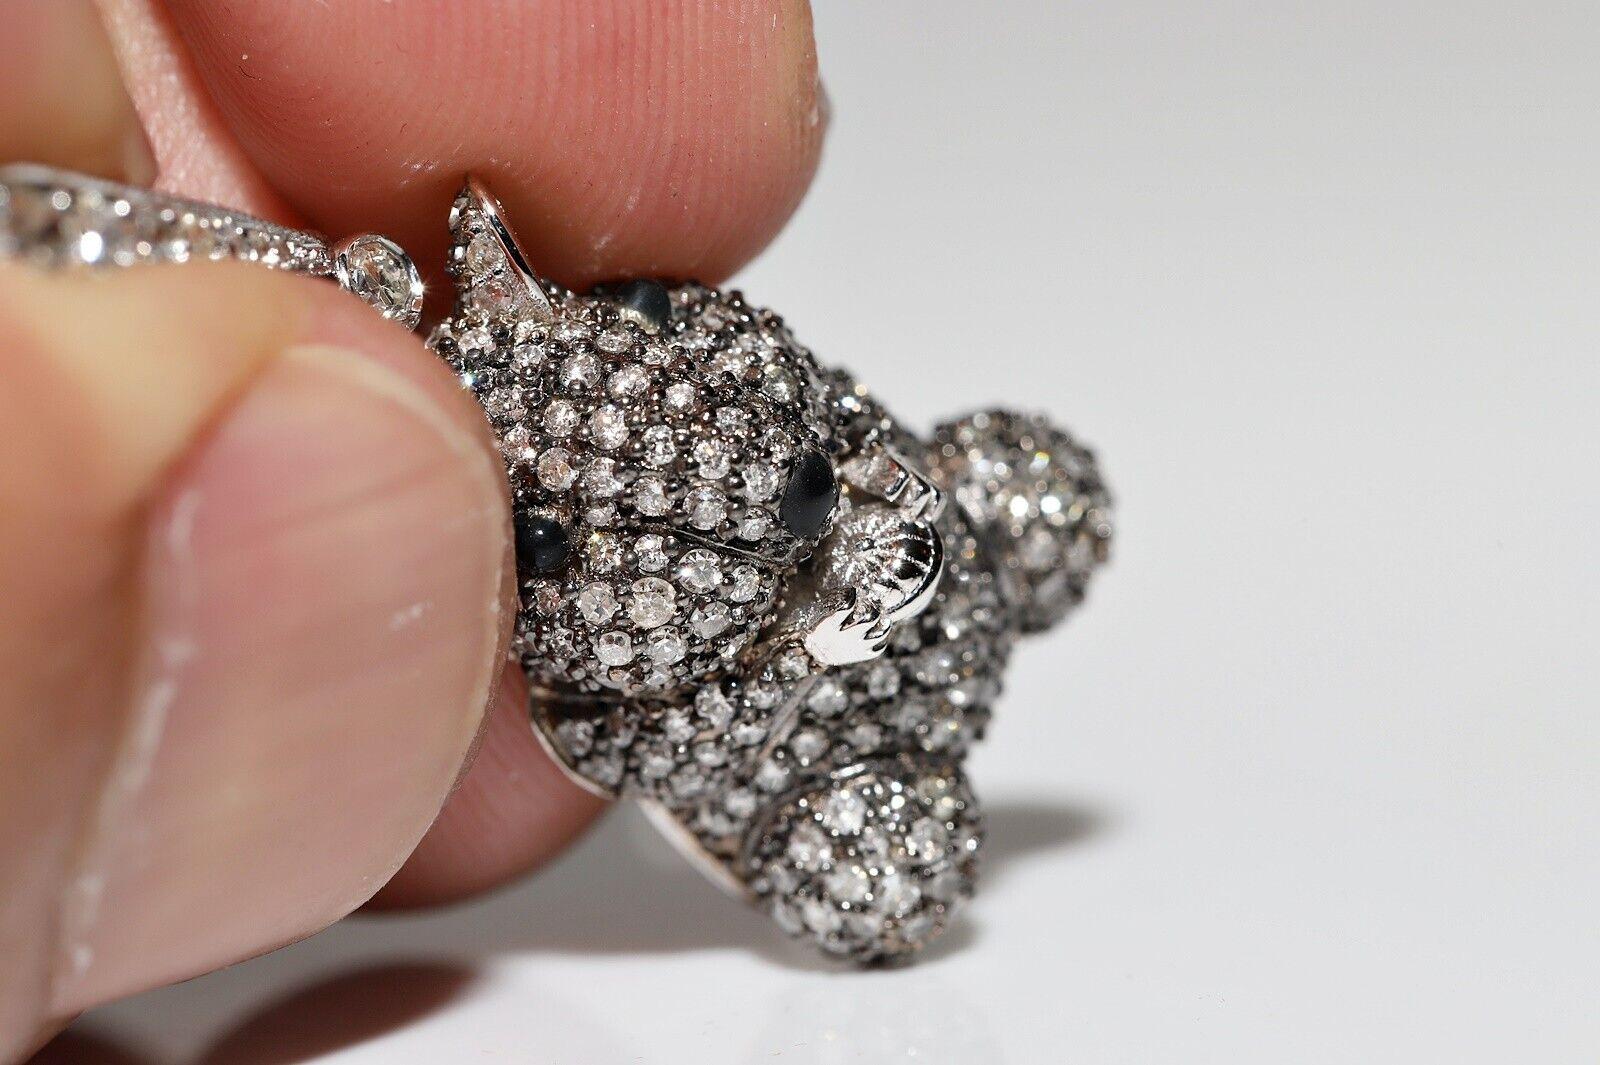 18k Gold New Made Natural Diamond And Sapphire Decorated Squirrel Earring In Good Condition For Sale In Fatih/İstanbul, 34